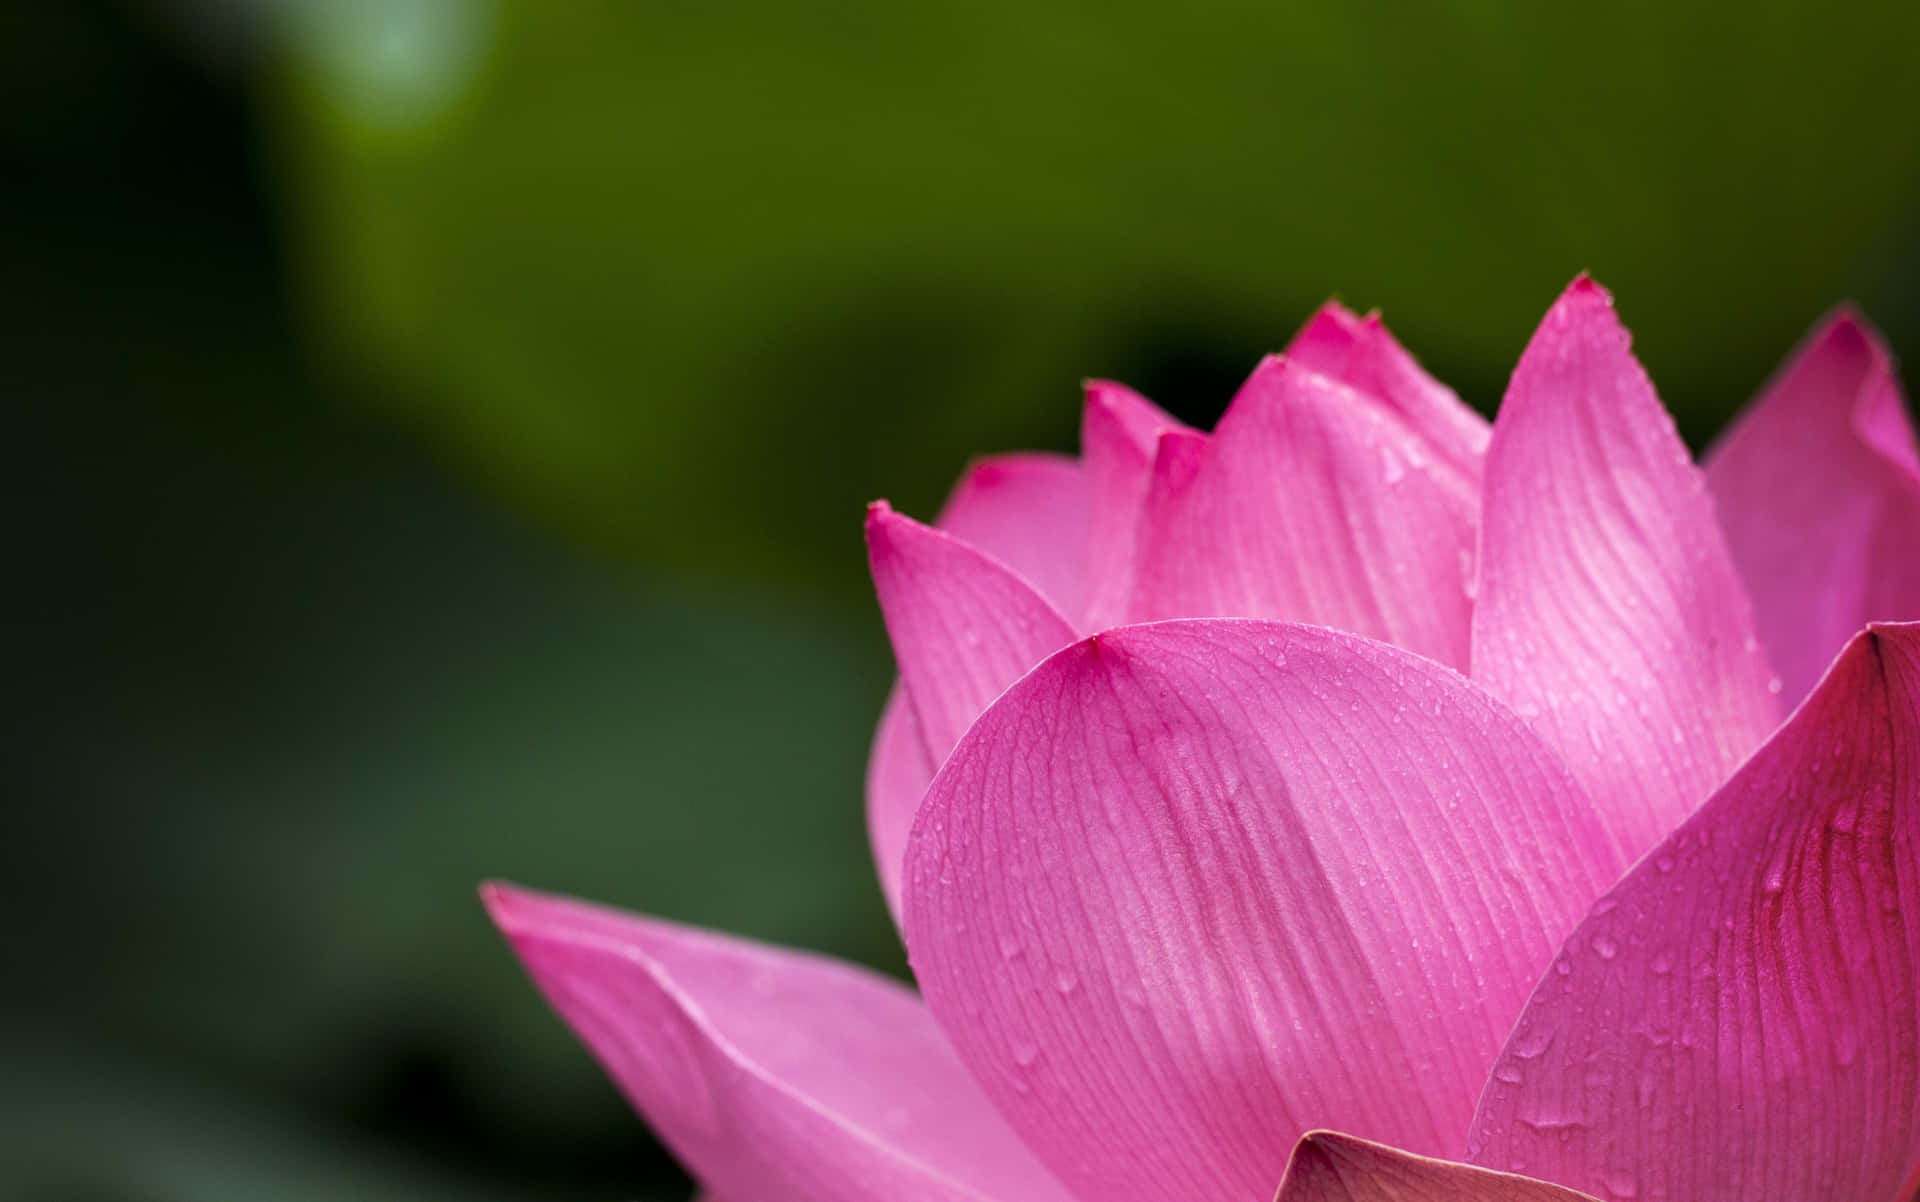 Tranquil Lotus Flower Blooming in a Calm Pond